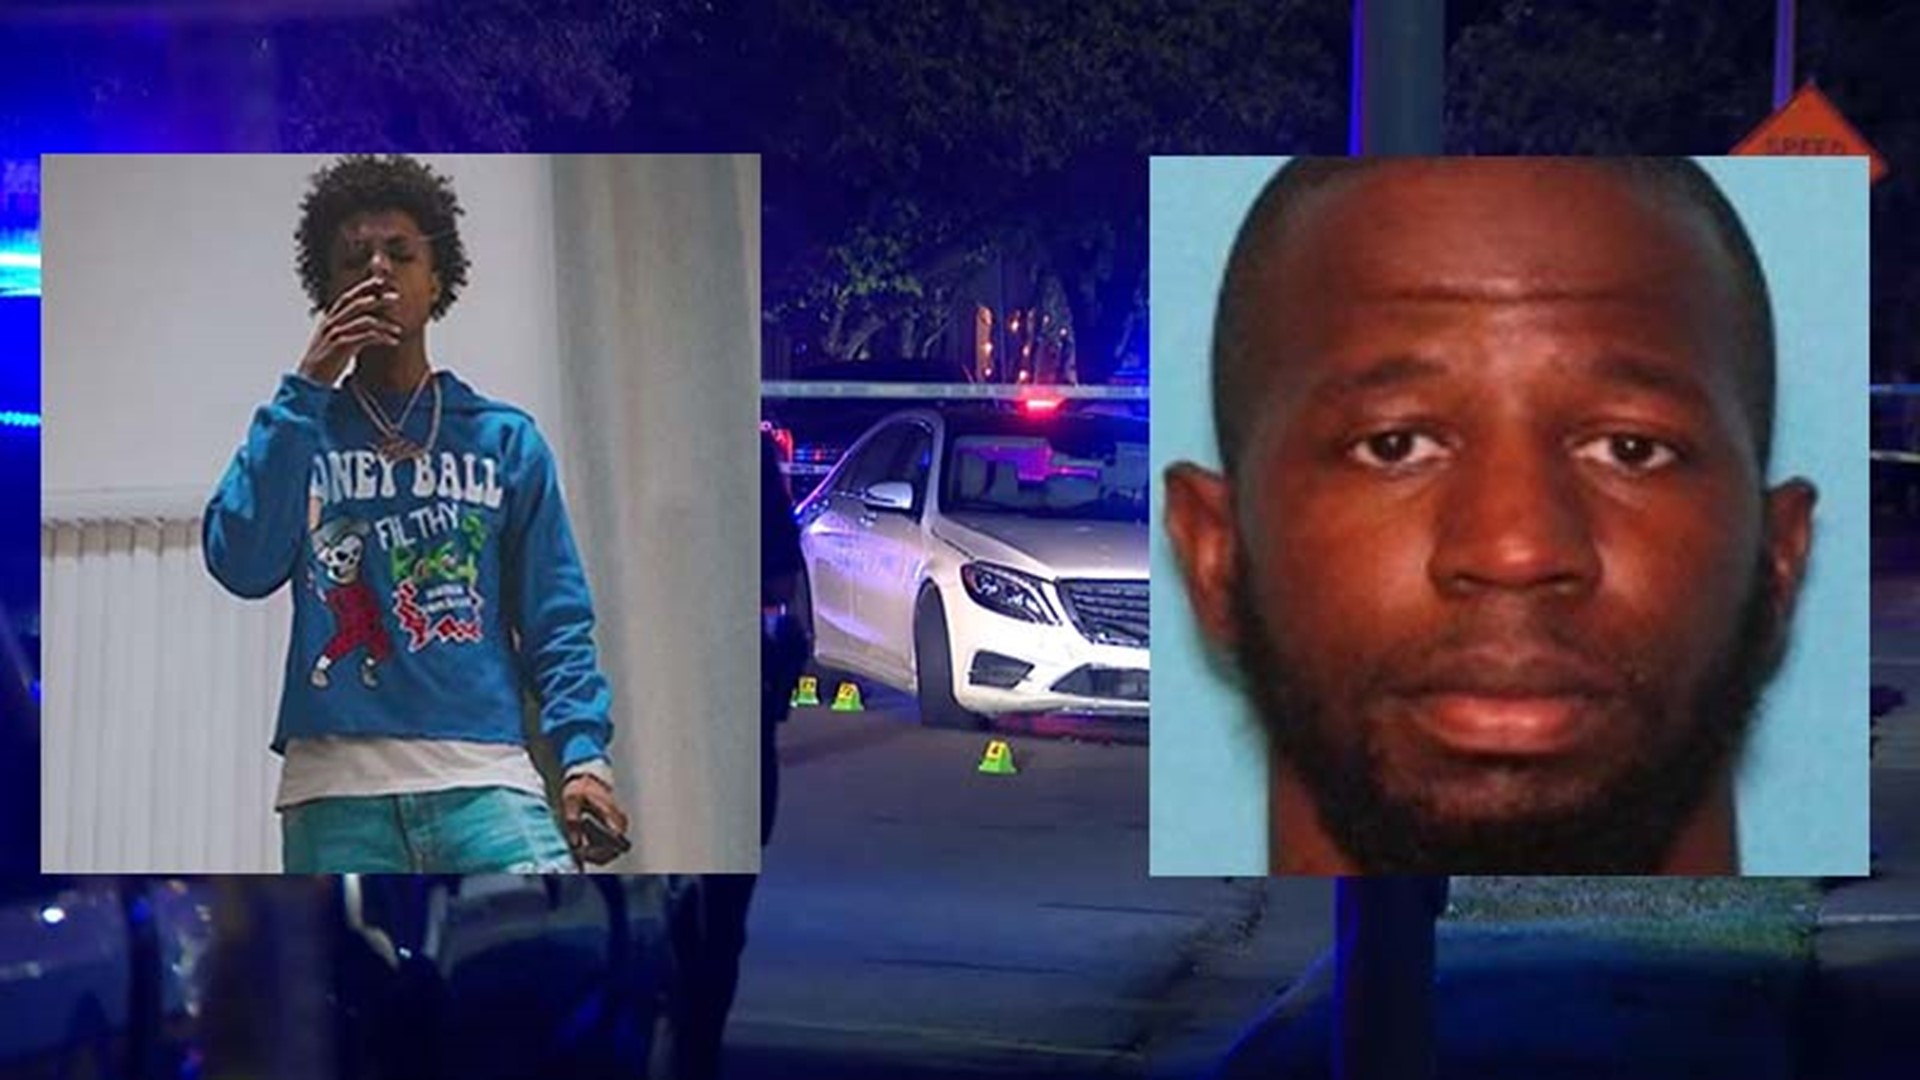 Fugitive Montrel Burley is charged with murder in the shooting death of 26-year-old Darrell Gentry, a rapper known on social media as BTB Savage.